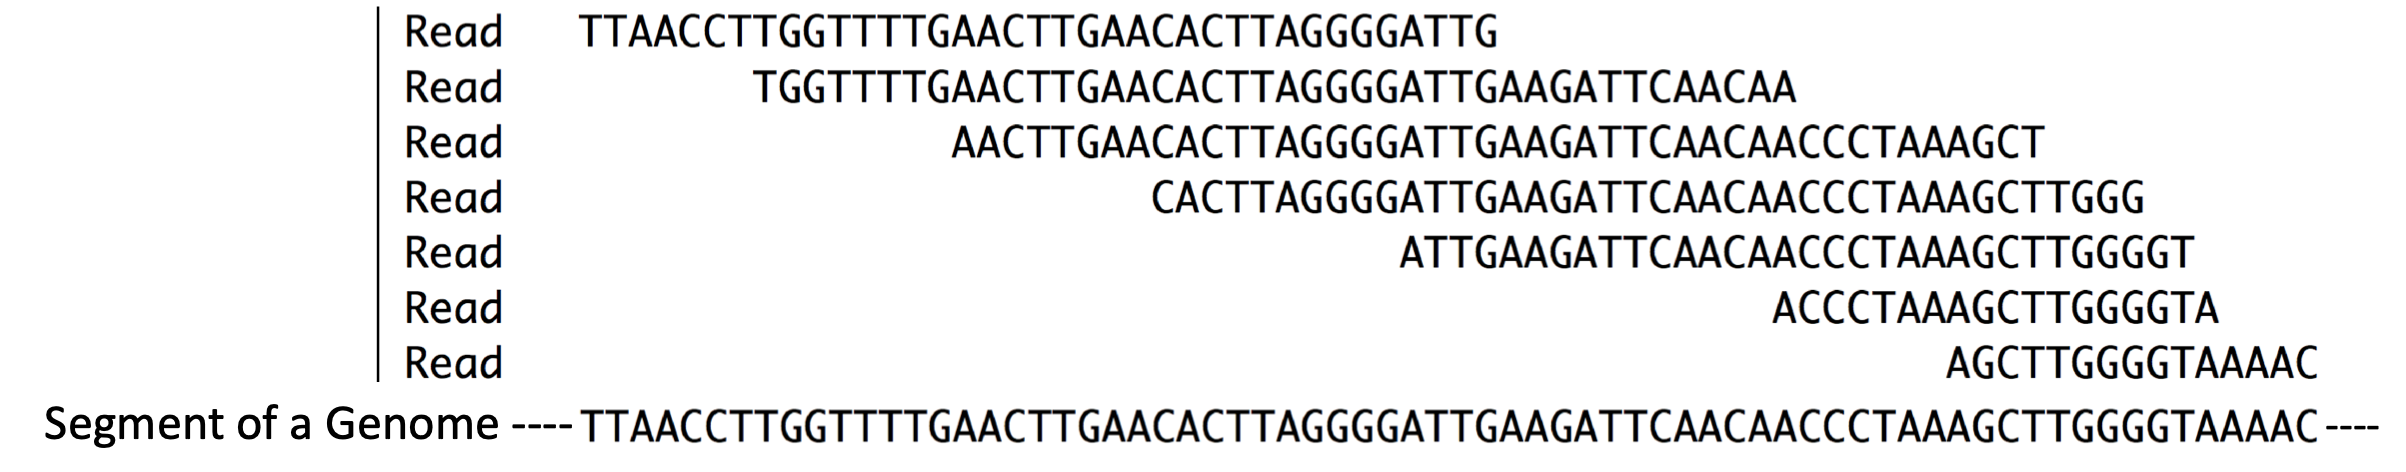 Reads = Sequence reads. They are typically short. These sequence reads align (match) the short segment of genome shown below. Compare the sequences that are placed directly above one another.